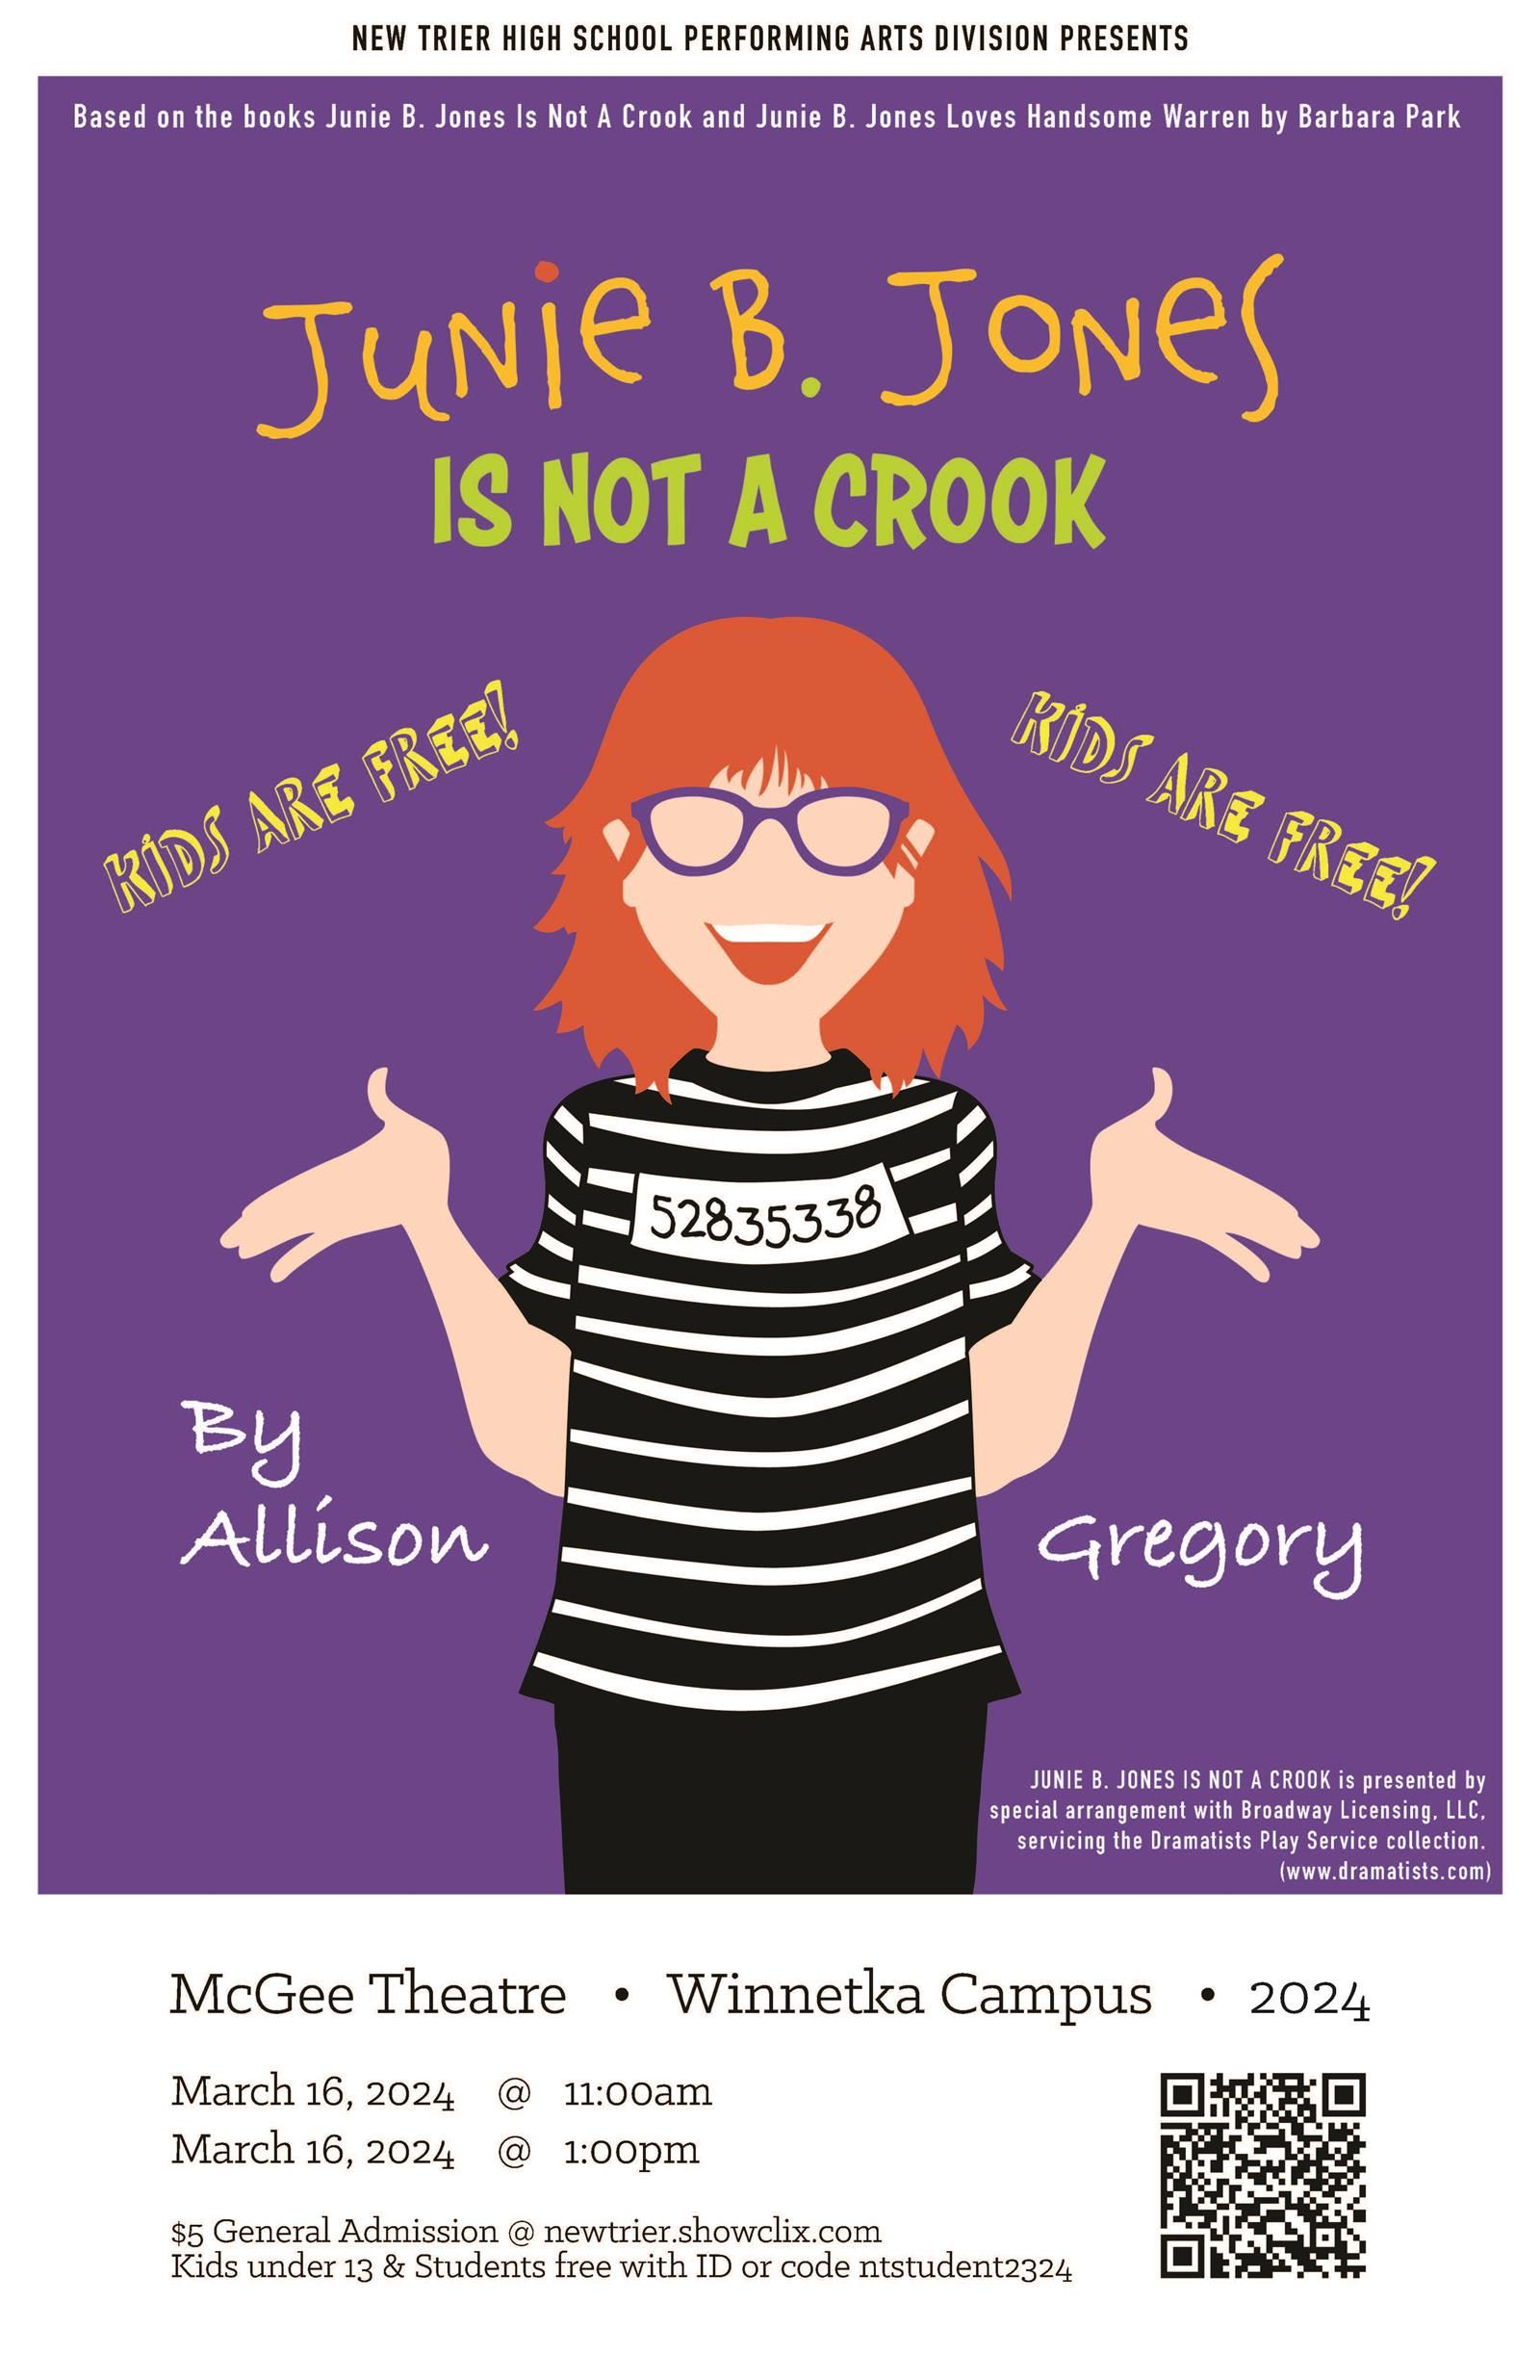 This year's Freshmen Sophomore Play, "Junie B. Jones Is Not A Crook" is on March 16 at 11:00am and 1:00pm.